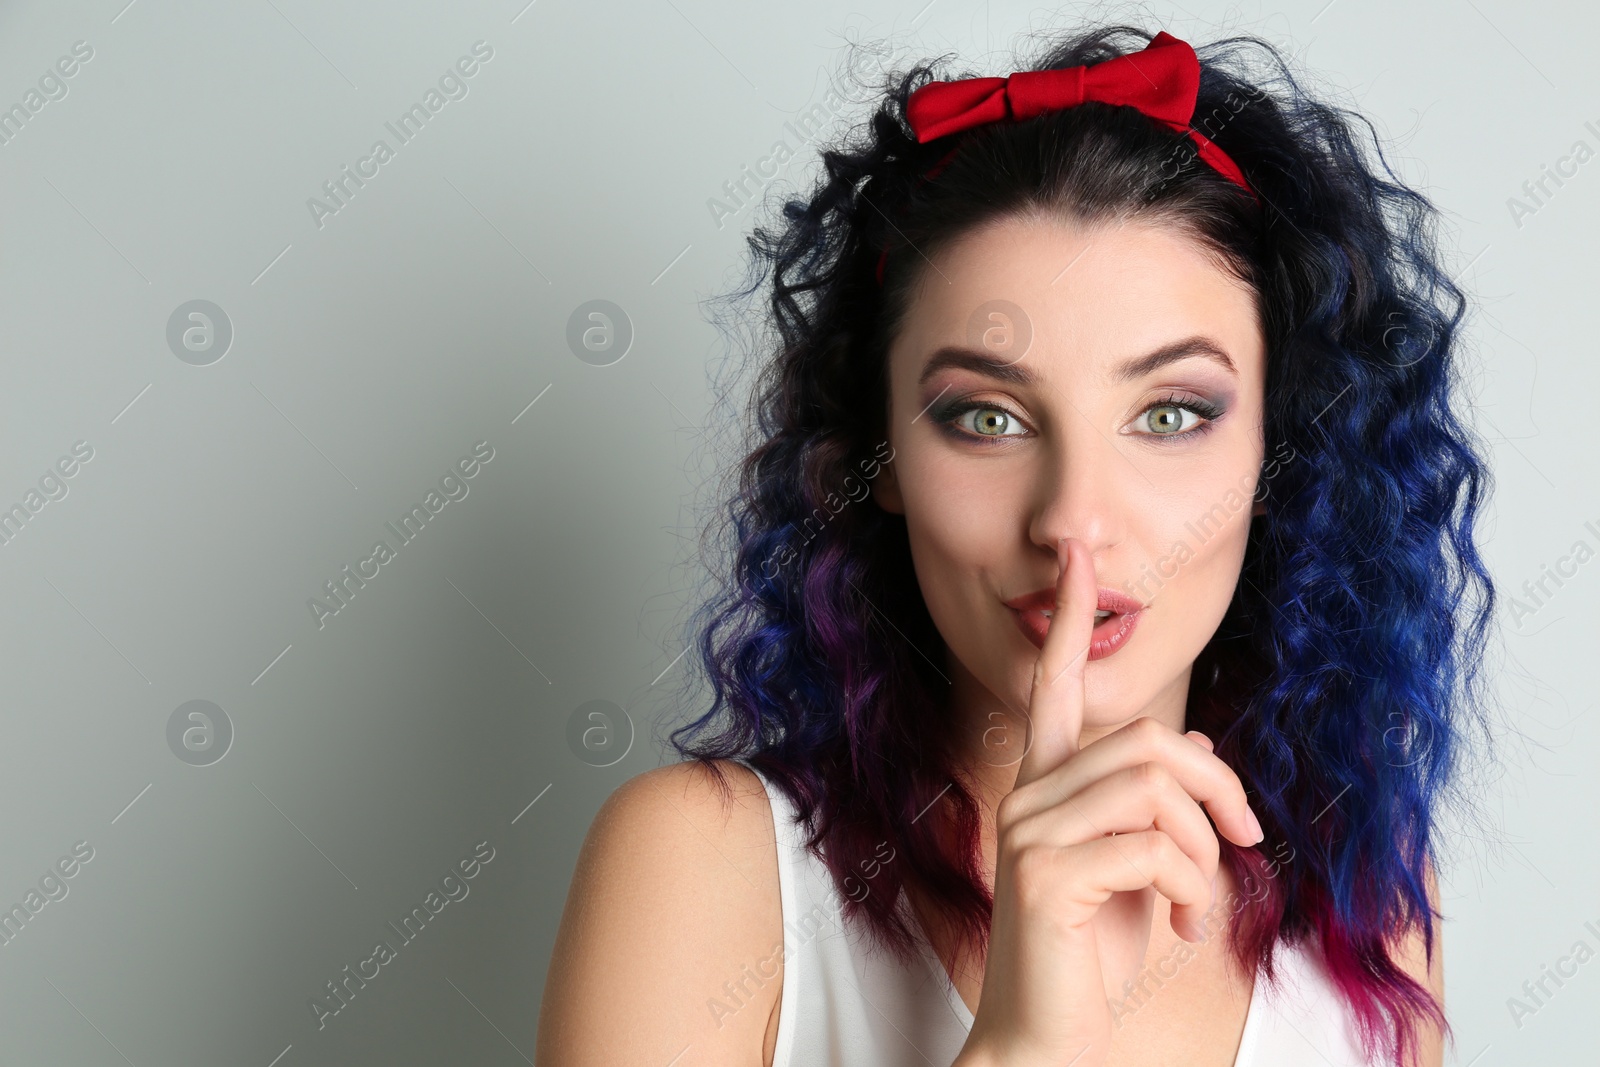 Photo of Emotional young woman with bright dyed hair on grey background